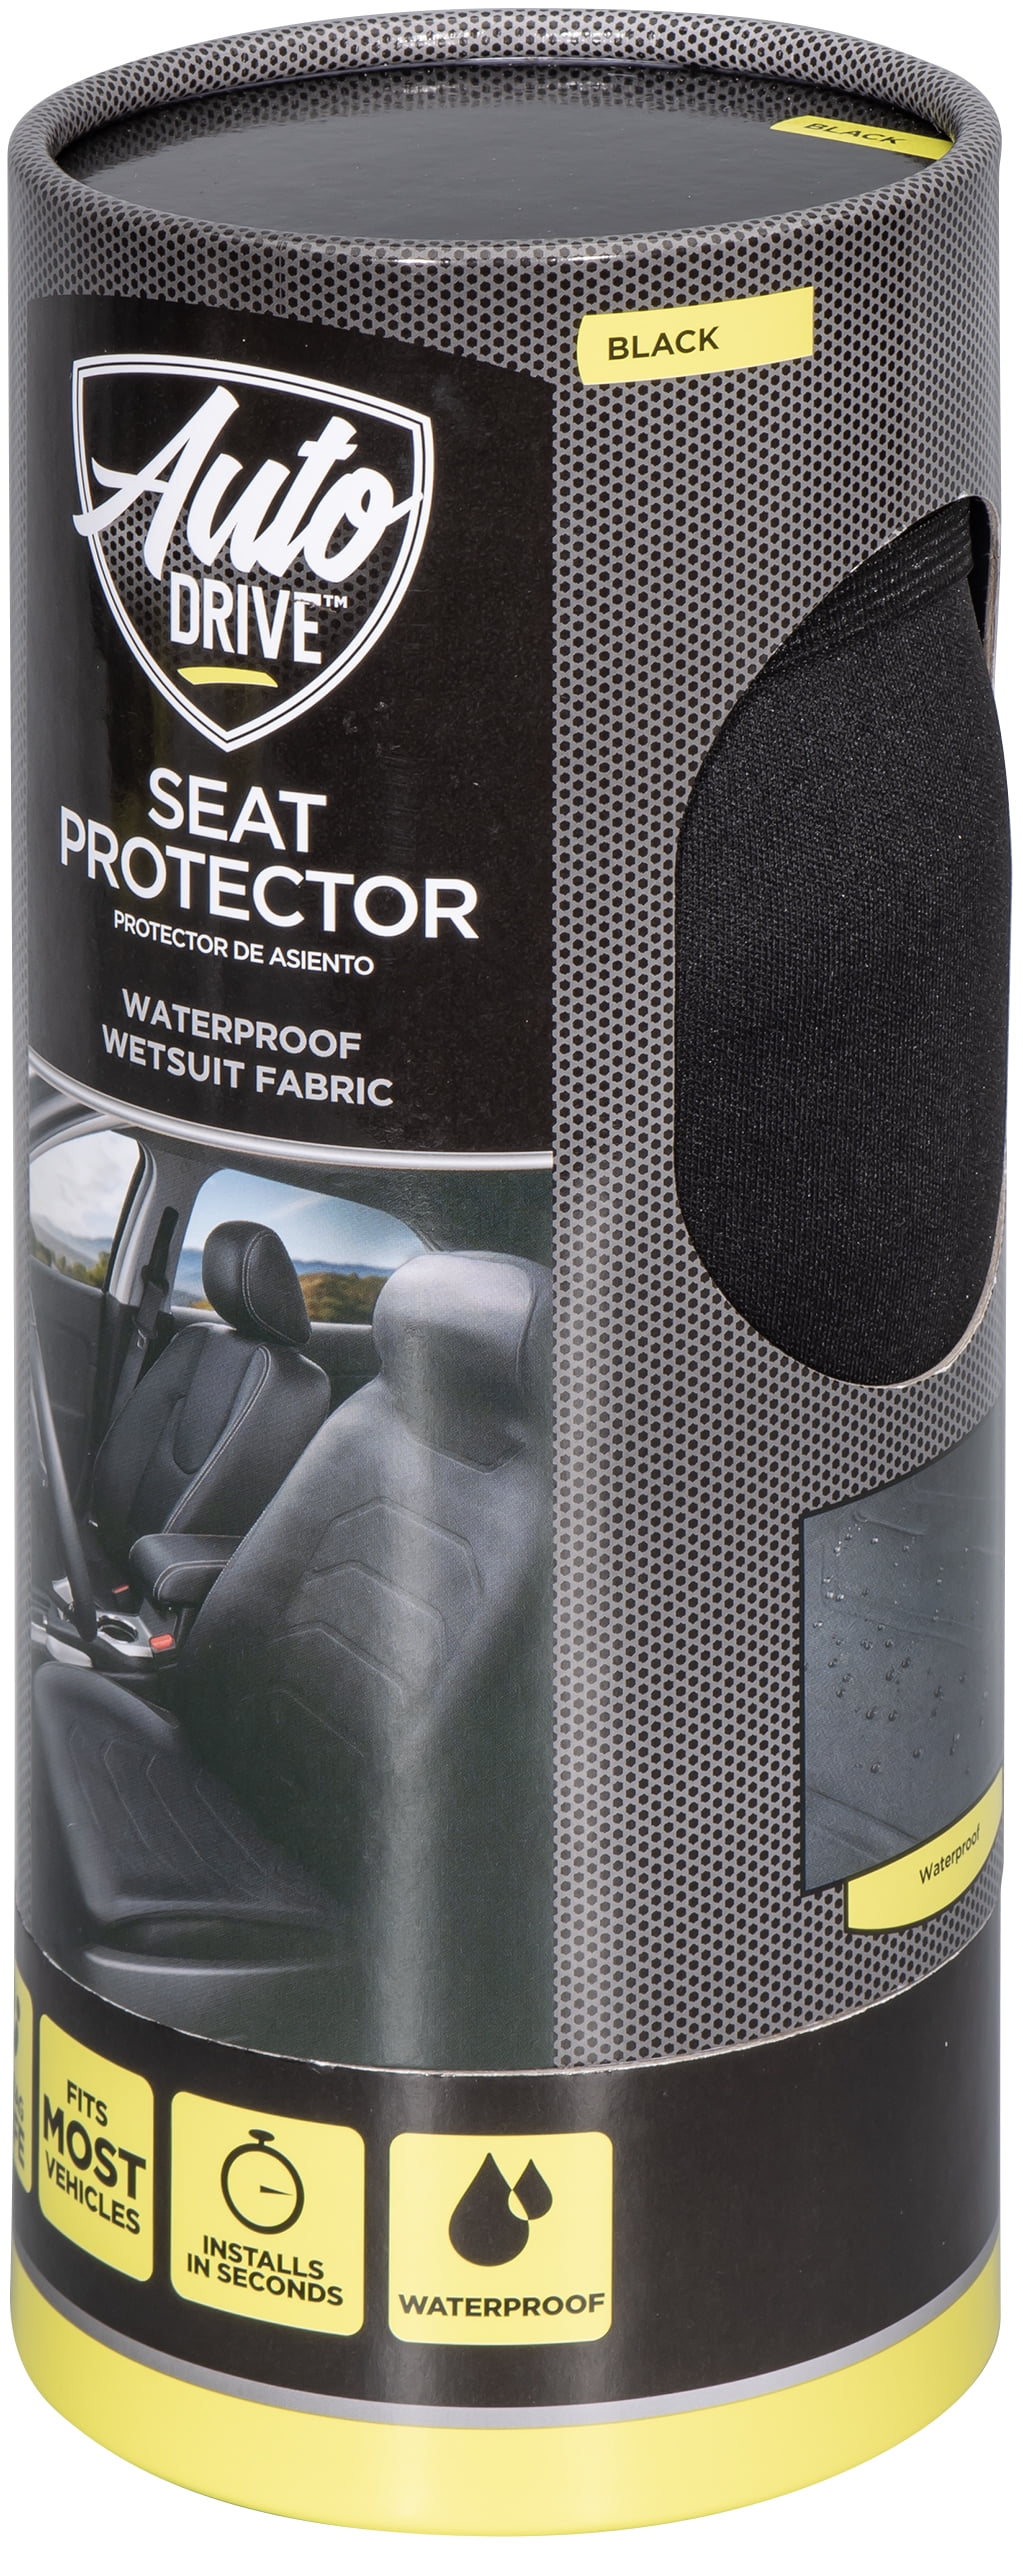 Auto Drive Waterproof Seat Protector Black, Universal Fit